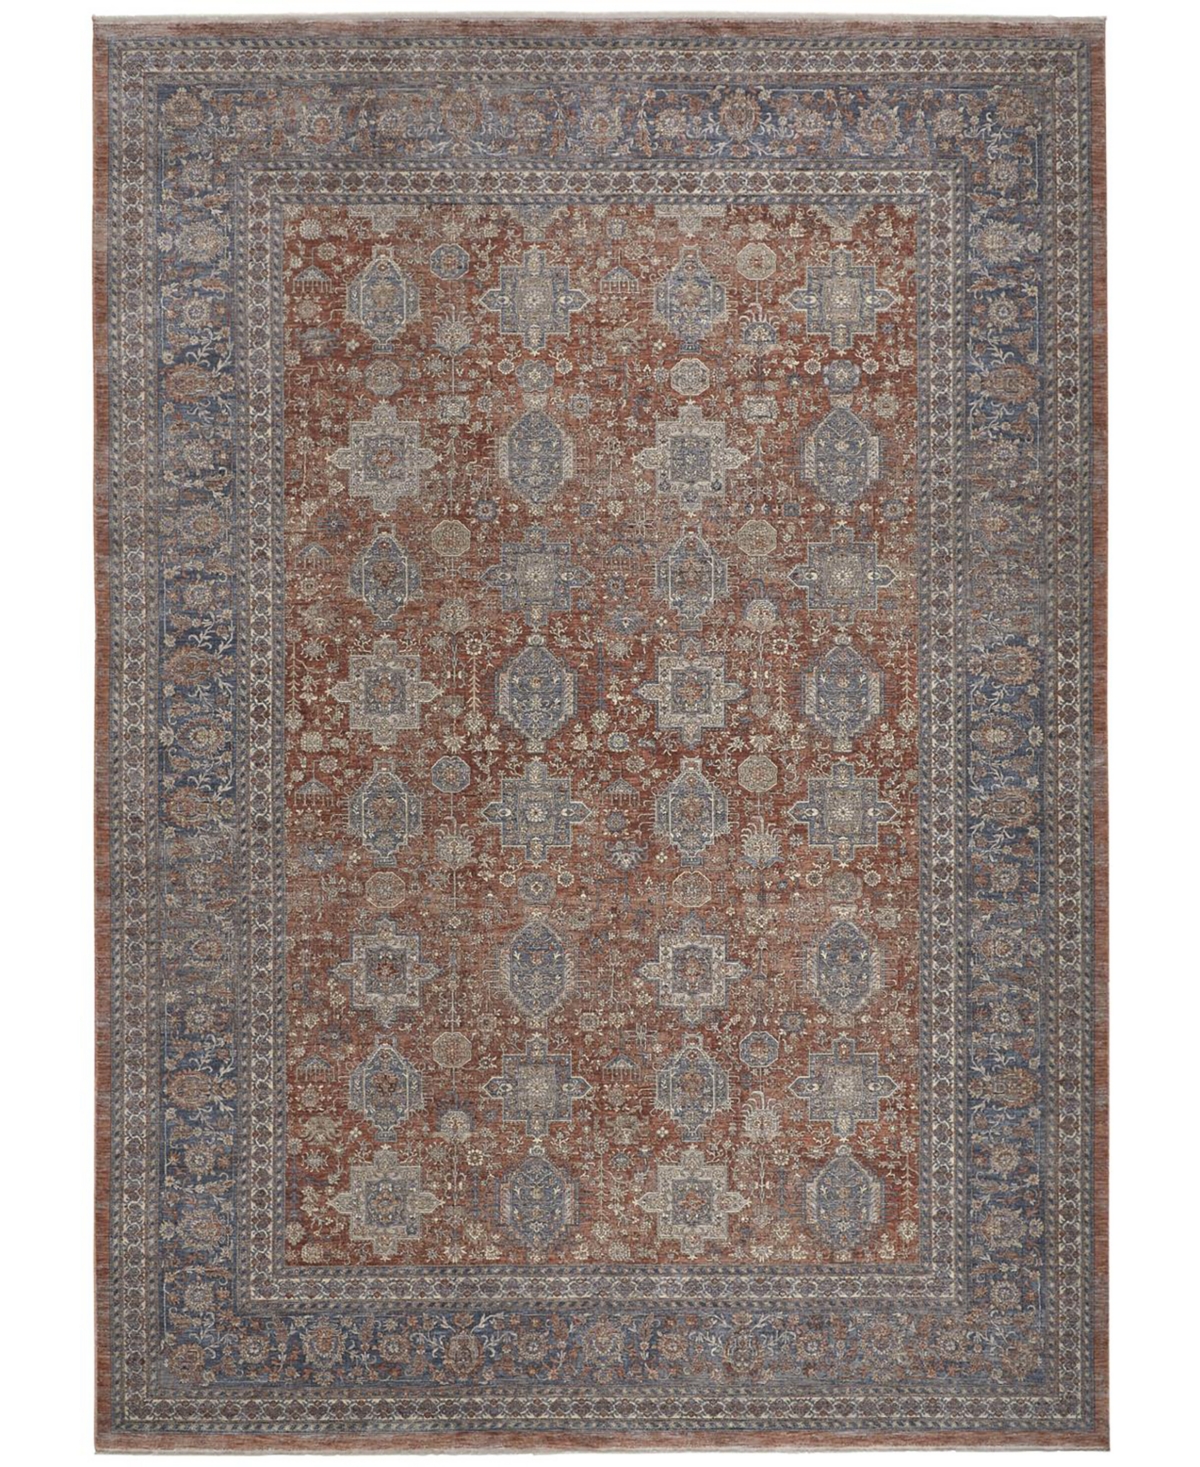 Simply Woven Marquette R3761 4' X 5'3" Area Rug In Rust,blue